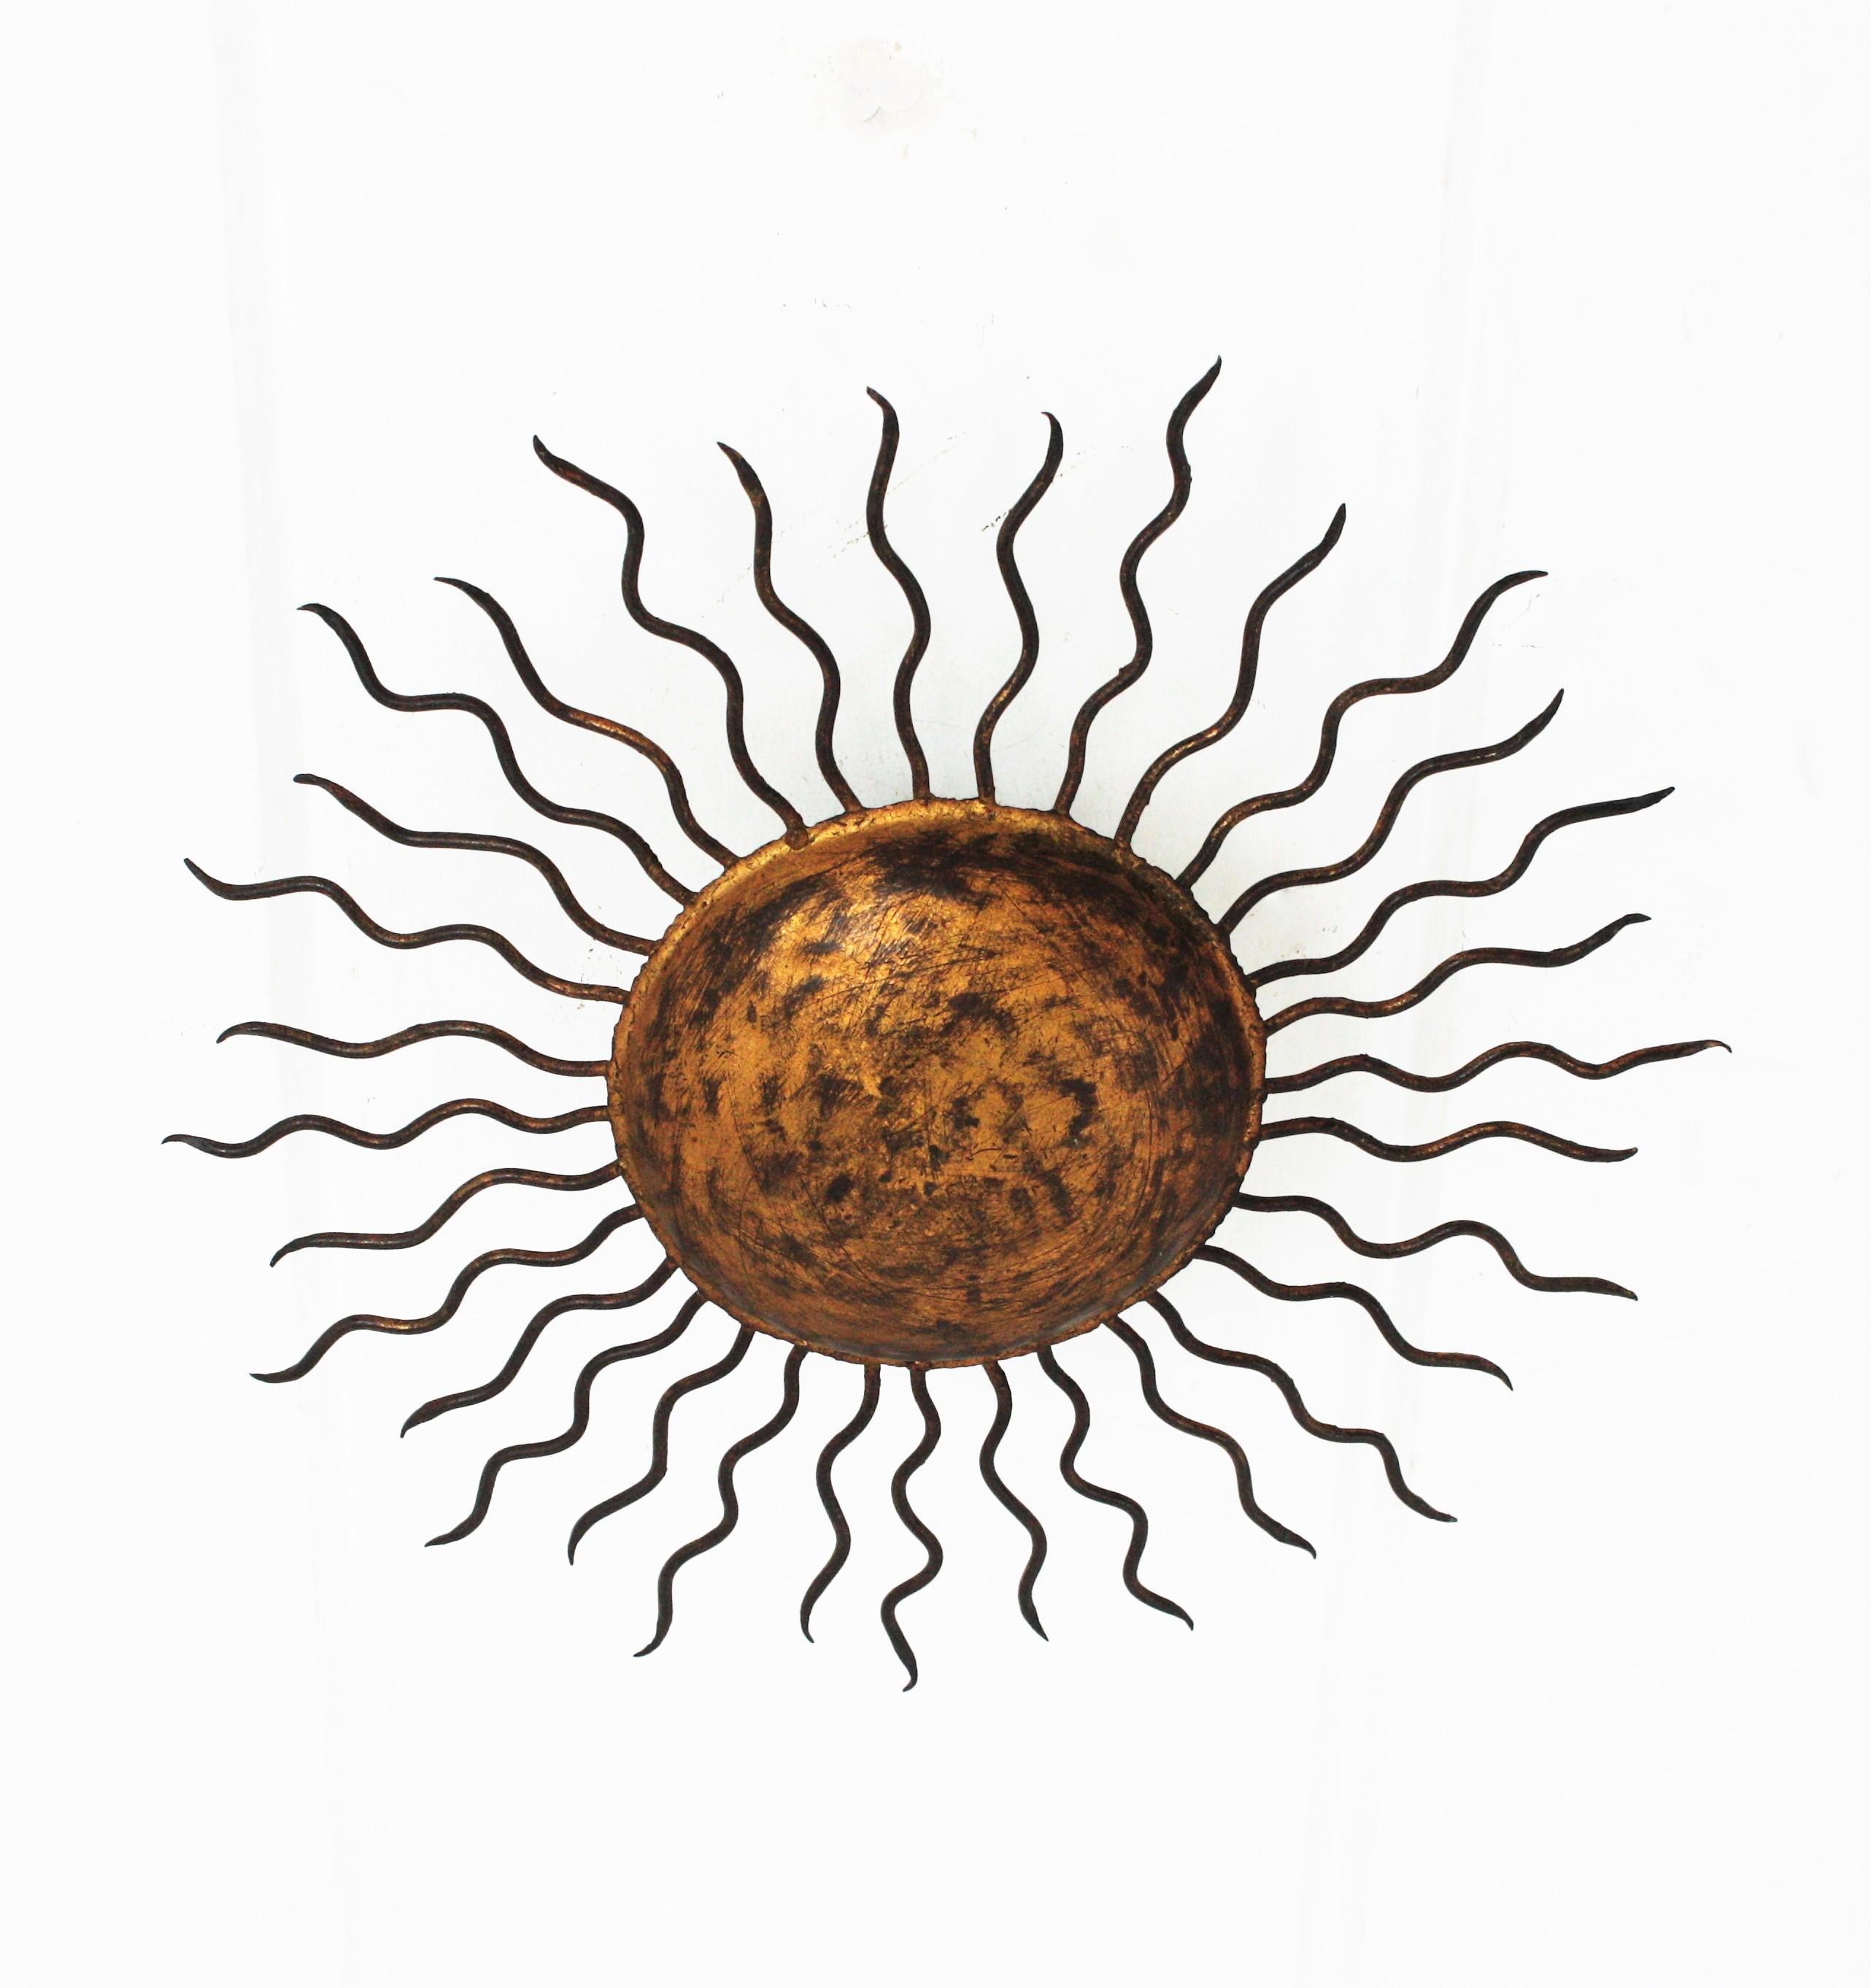 Hand-hammered gilt iron sunburst light fixture with Brutalist accents. Richly decorated with hand-hammered marks, Spain, 1950s.
It has curly iron rays in two sizes surrounding a central large sphere. It can be placed as ceiling light fixture but